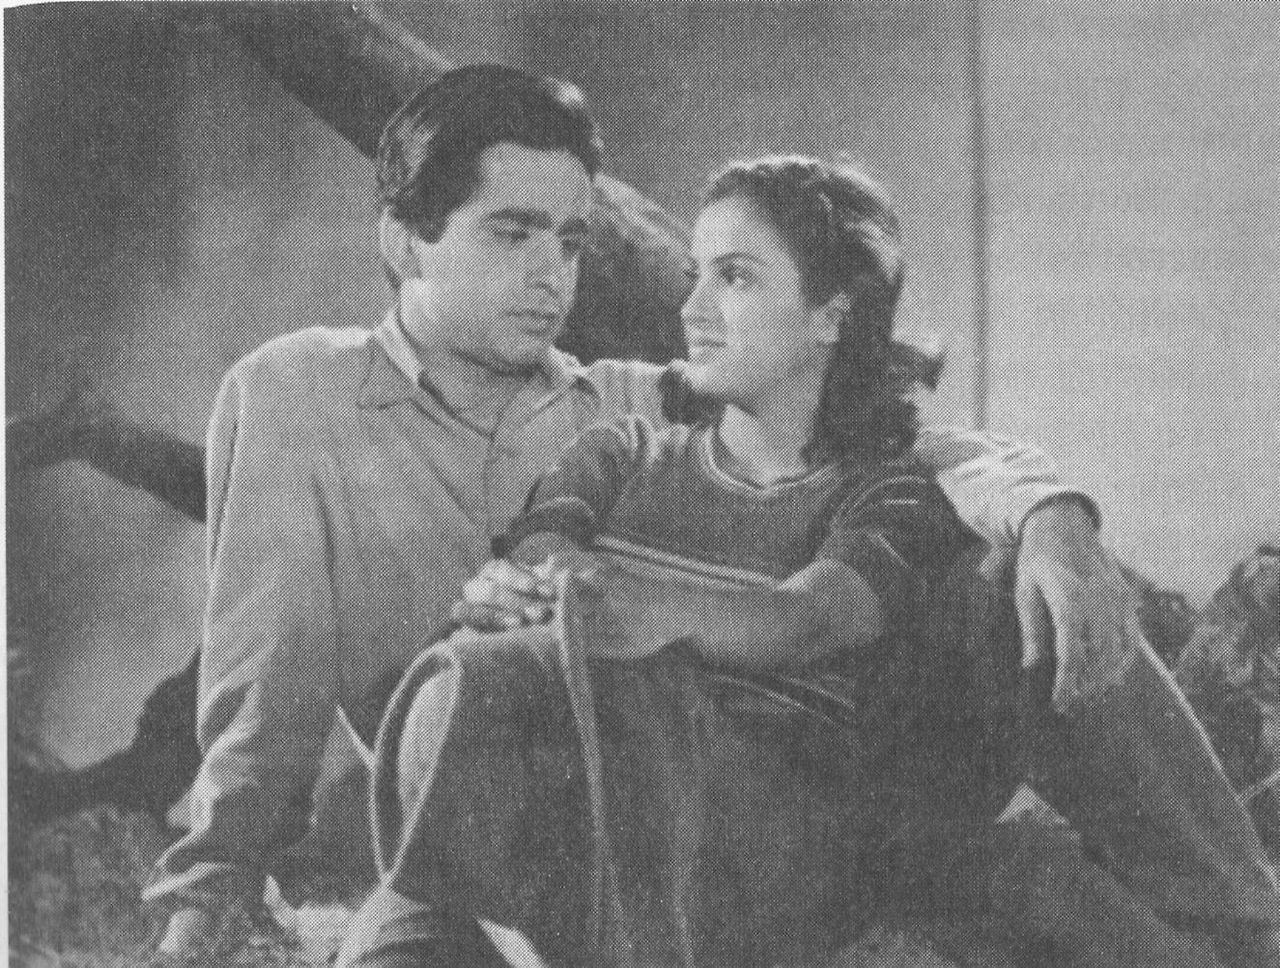 Kamini Kaushal remembers Dilip Kumar in an interview conducted in 2014 -
A definitive chapter in her life has been her onscreen pairing and off-screen relationship with Dilip Kumar with whom she worked in Shaheed (1947), Nadiya Ke Paar and Shabnam...